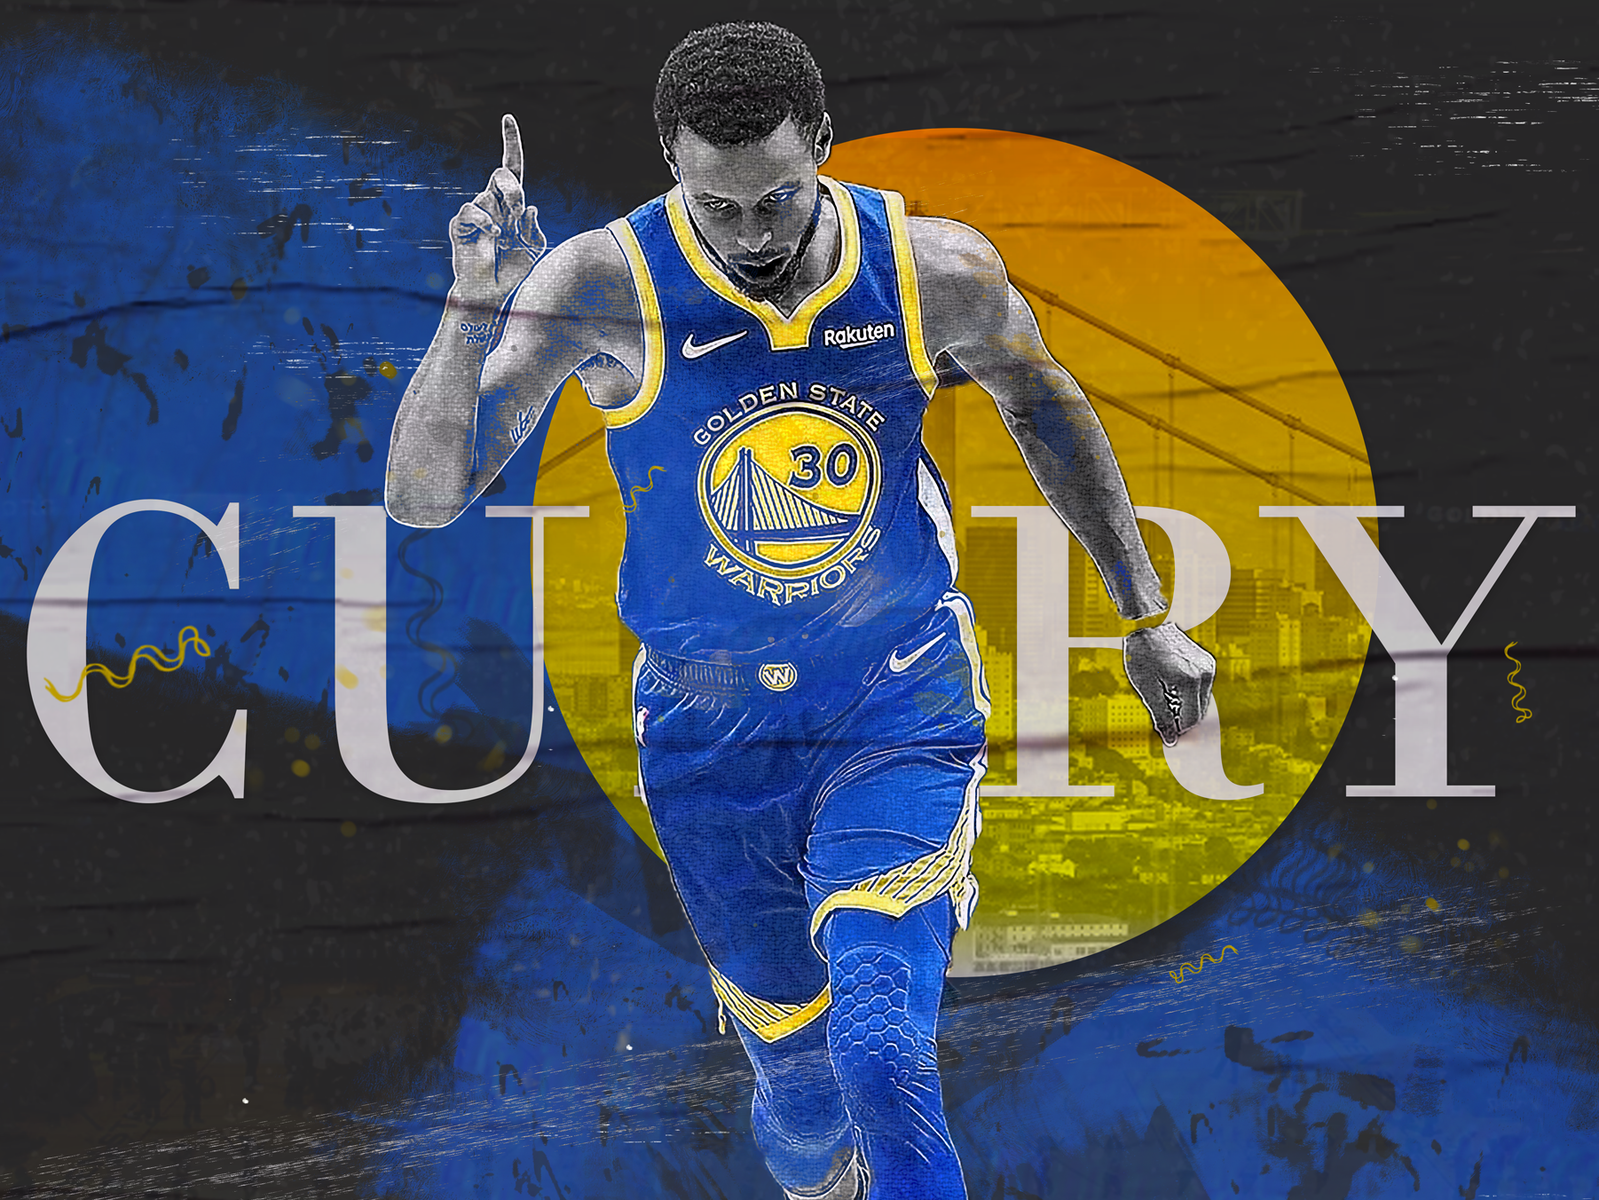 Steph Curry Poster Design on Behance